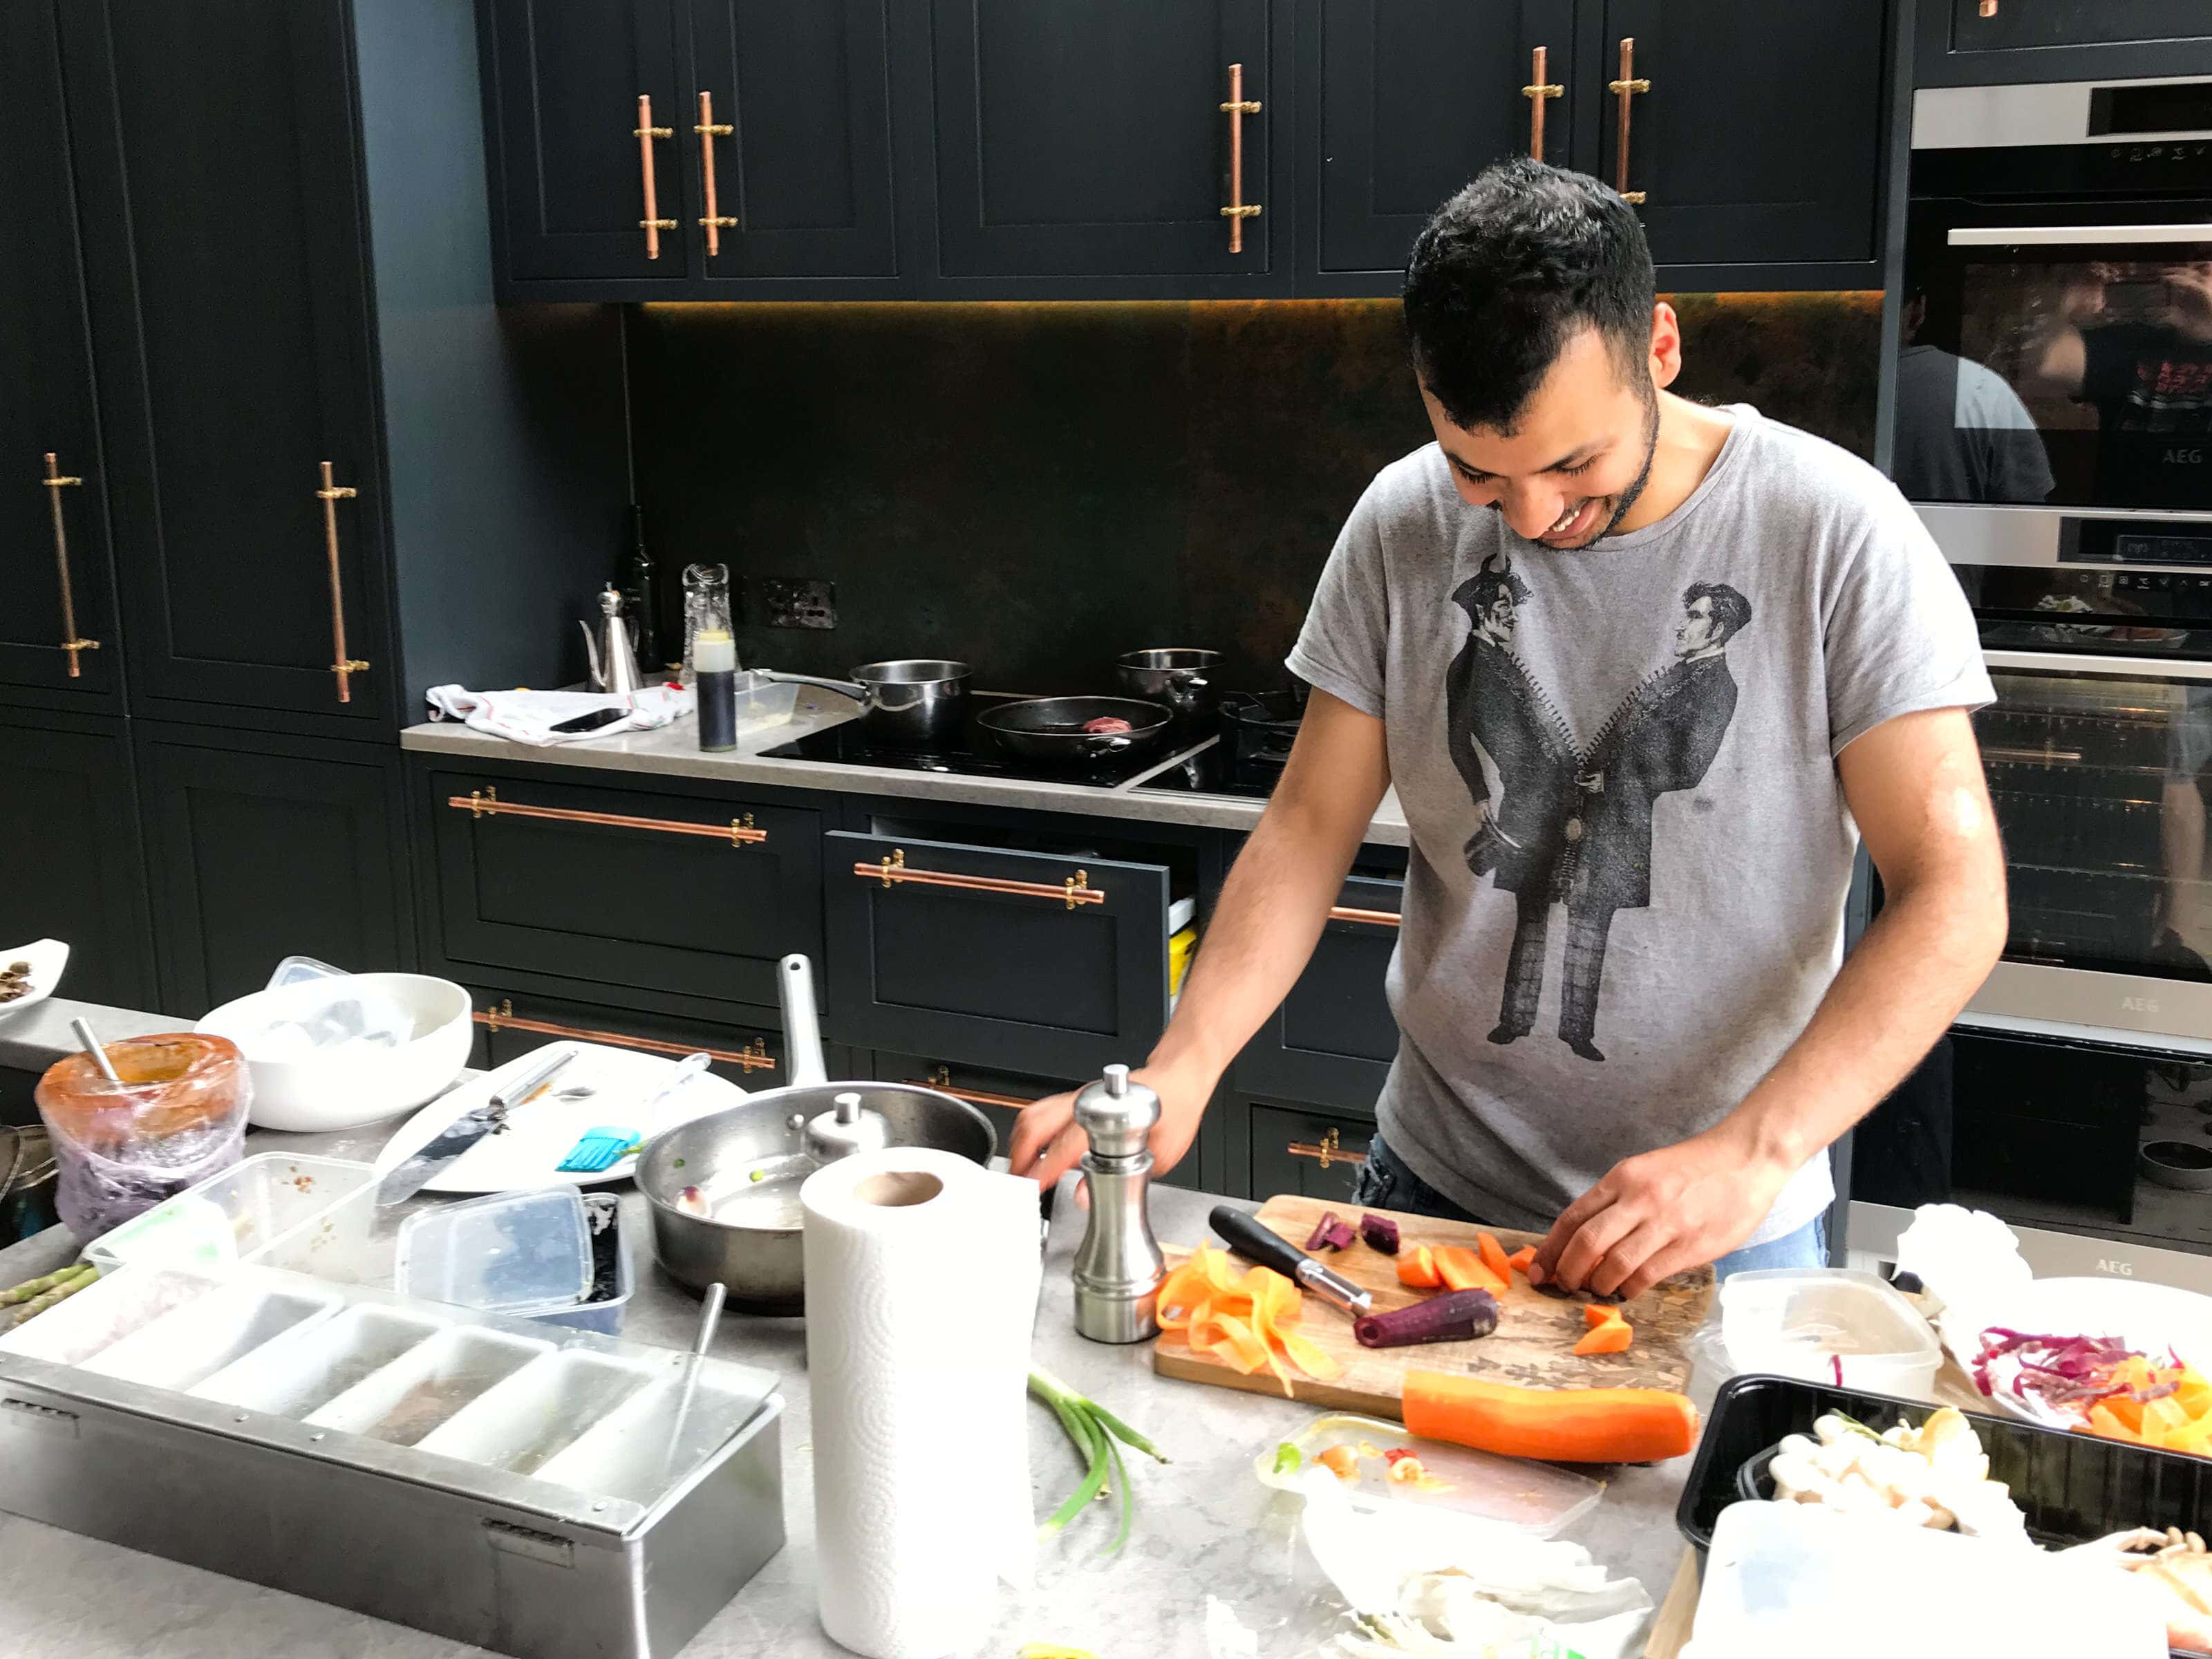 Mustapha Mouflih from Anima & Cuore in Kentish Town prepping for a photo shoot in the studio kitchen.